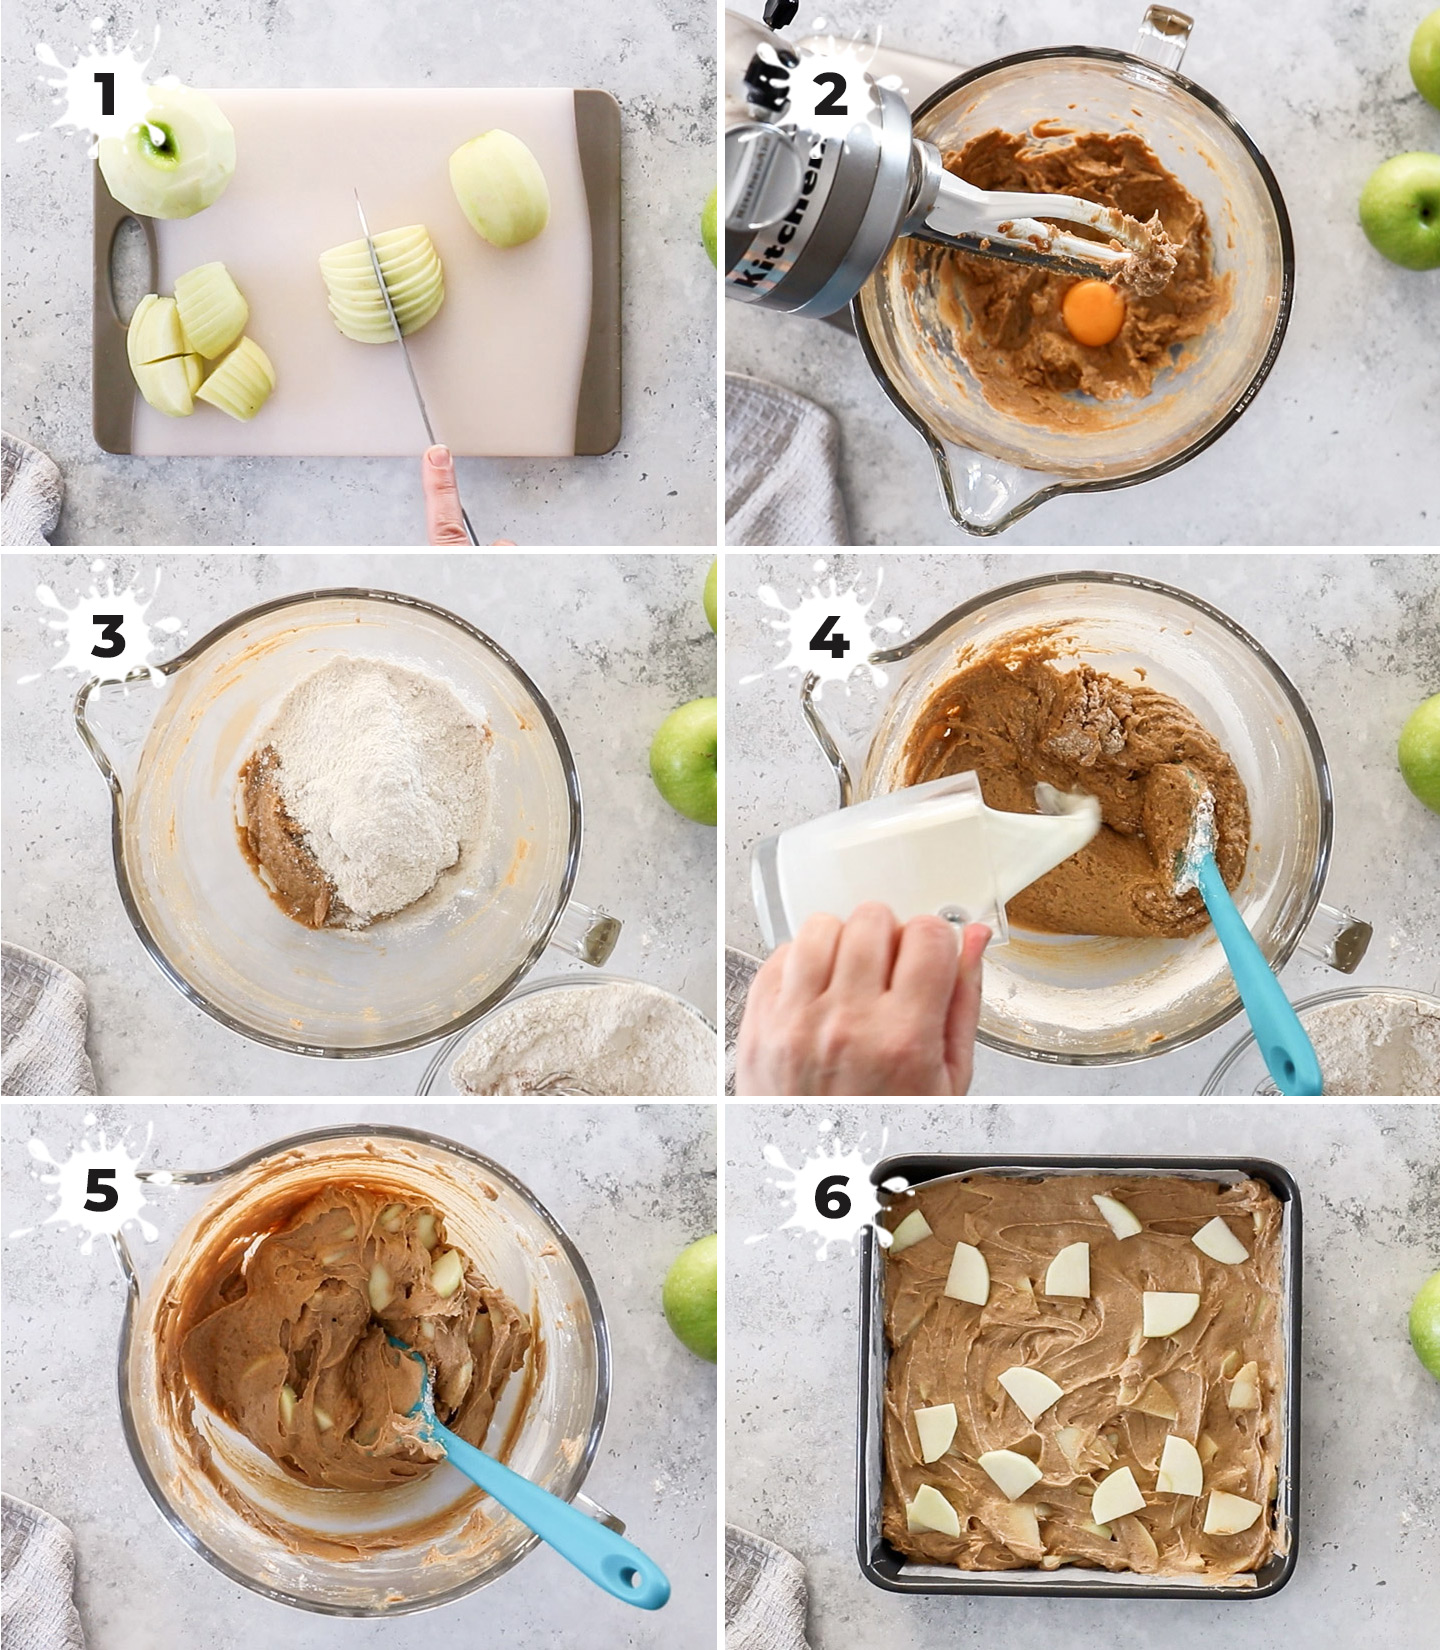 A collage showing the steps to making apple traybake.